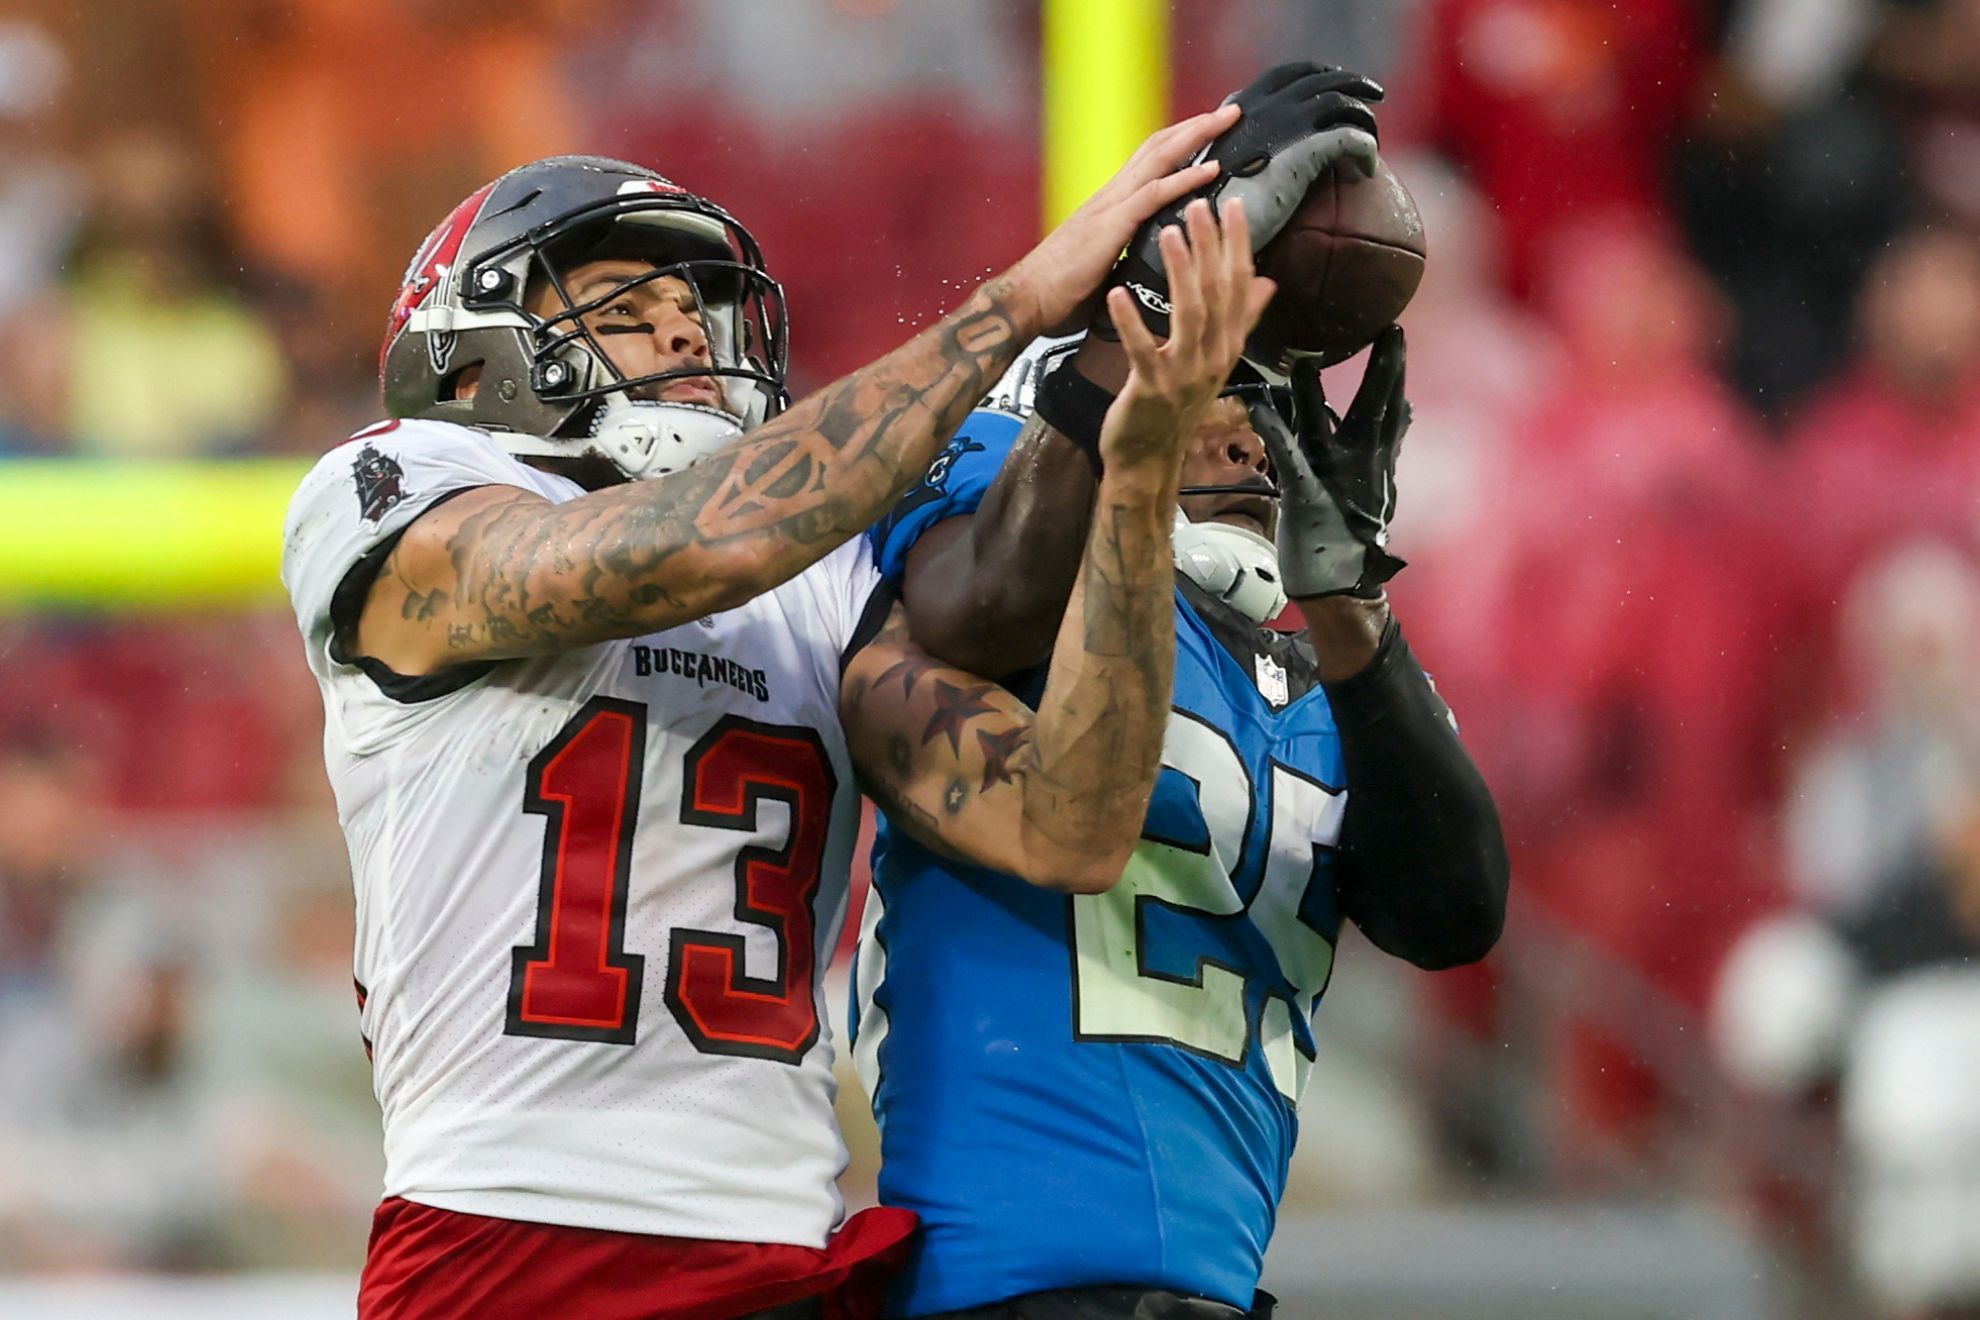 Buccaneers WR Mike Evans extends incredible NFL record to join Jerry Rice